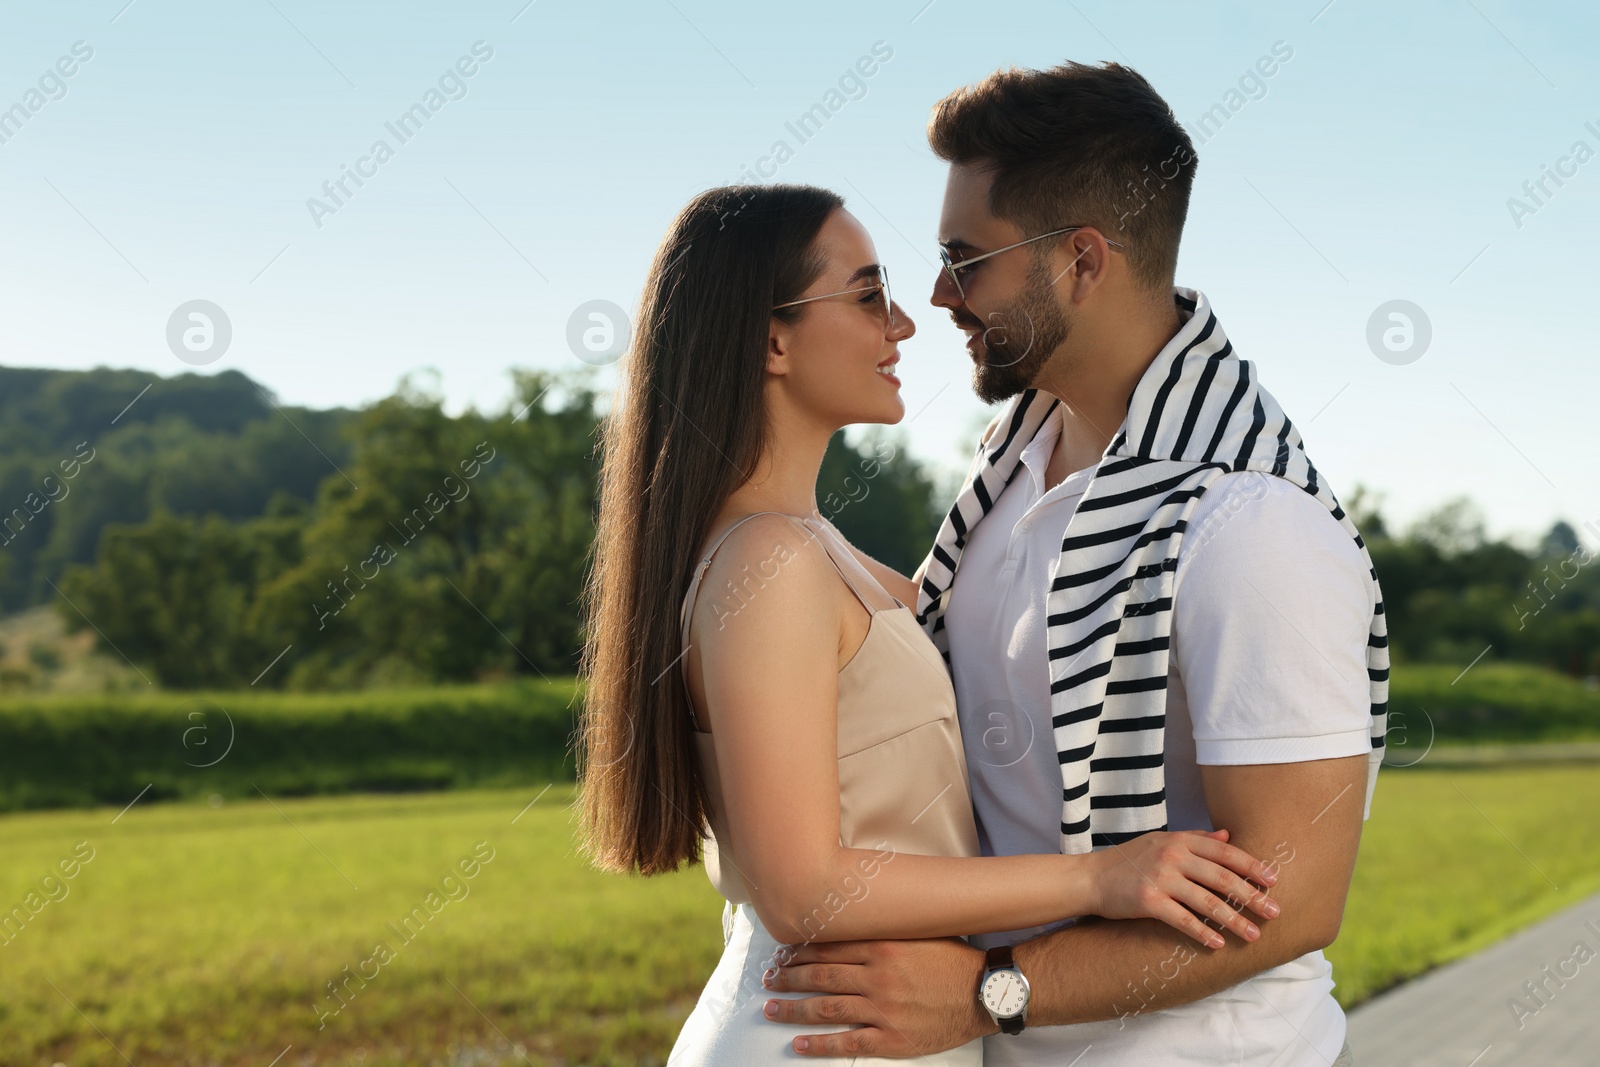 Photo of Romantic date. Beautiful couple spending time together in park, space for text